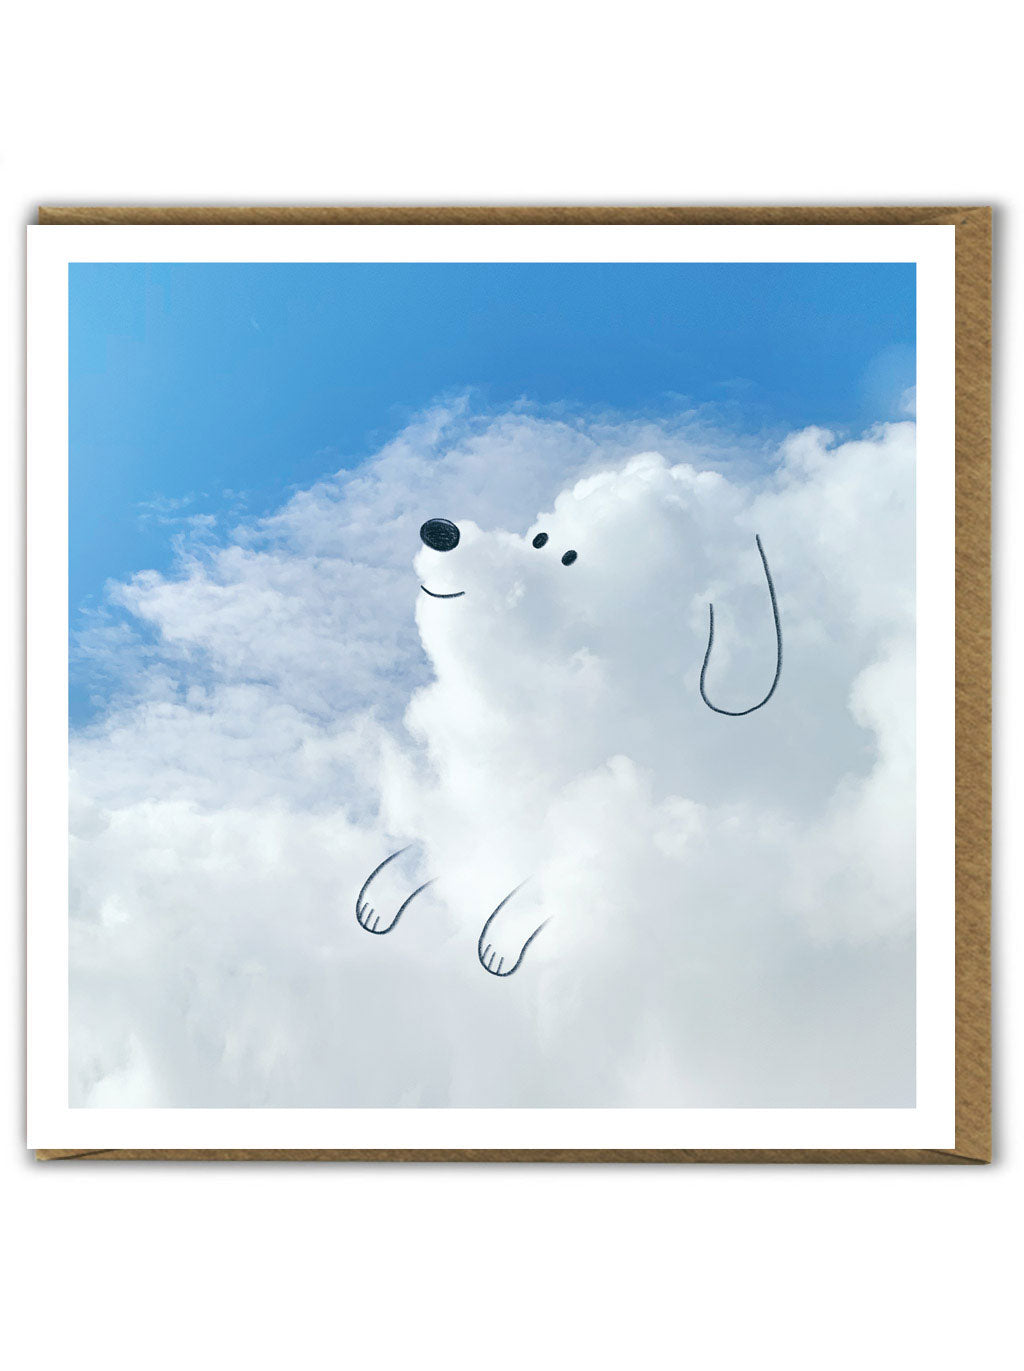 A greetings card showing a cloudy sky where the clouds have been made to look like a happy dog using a black pen.